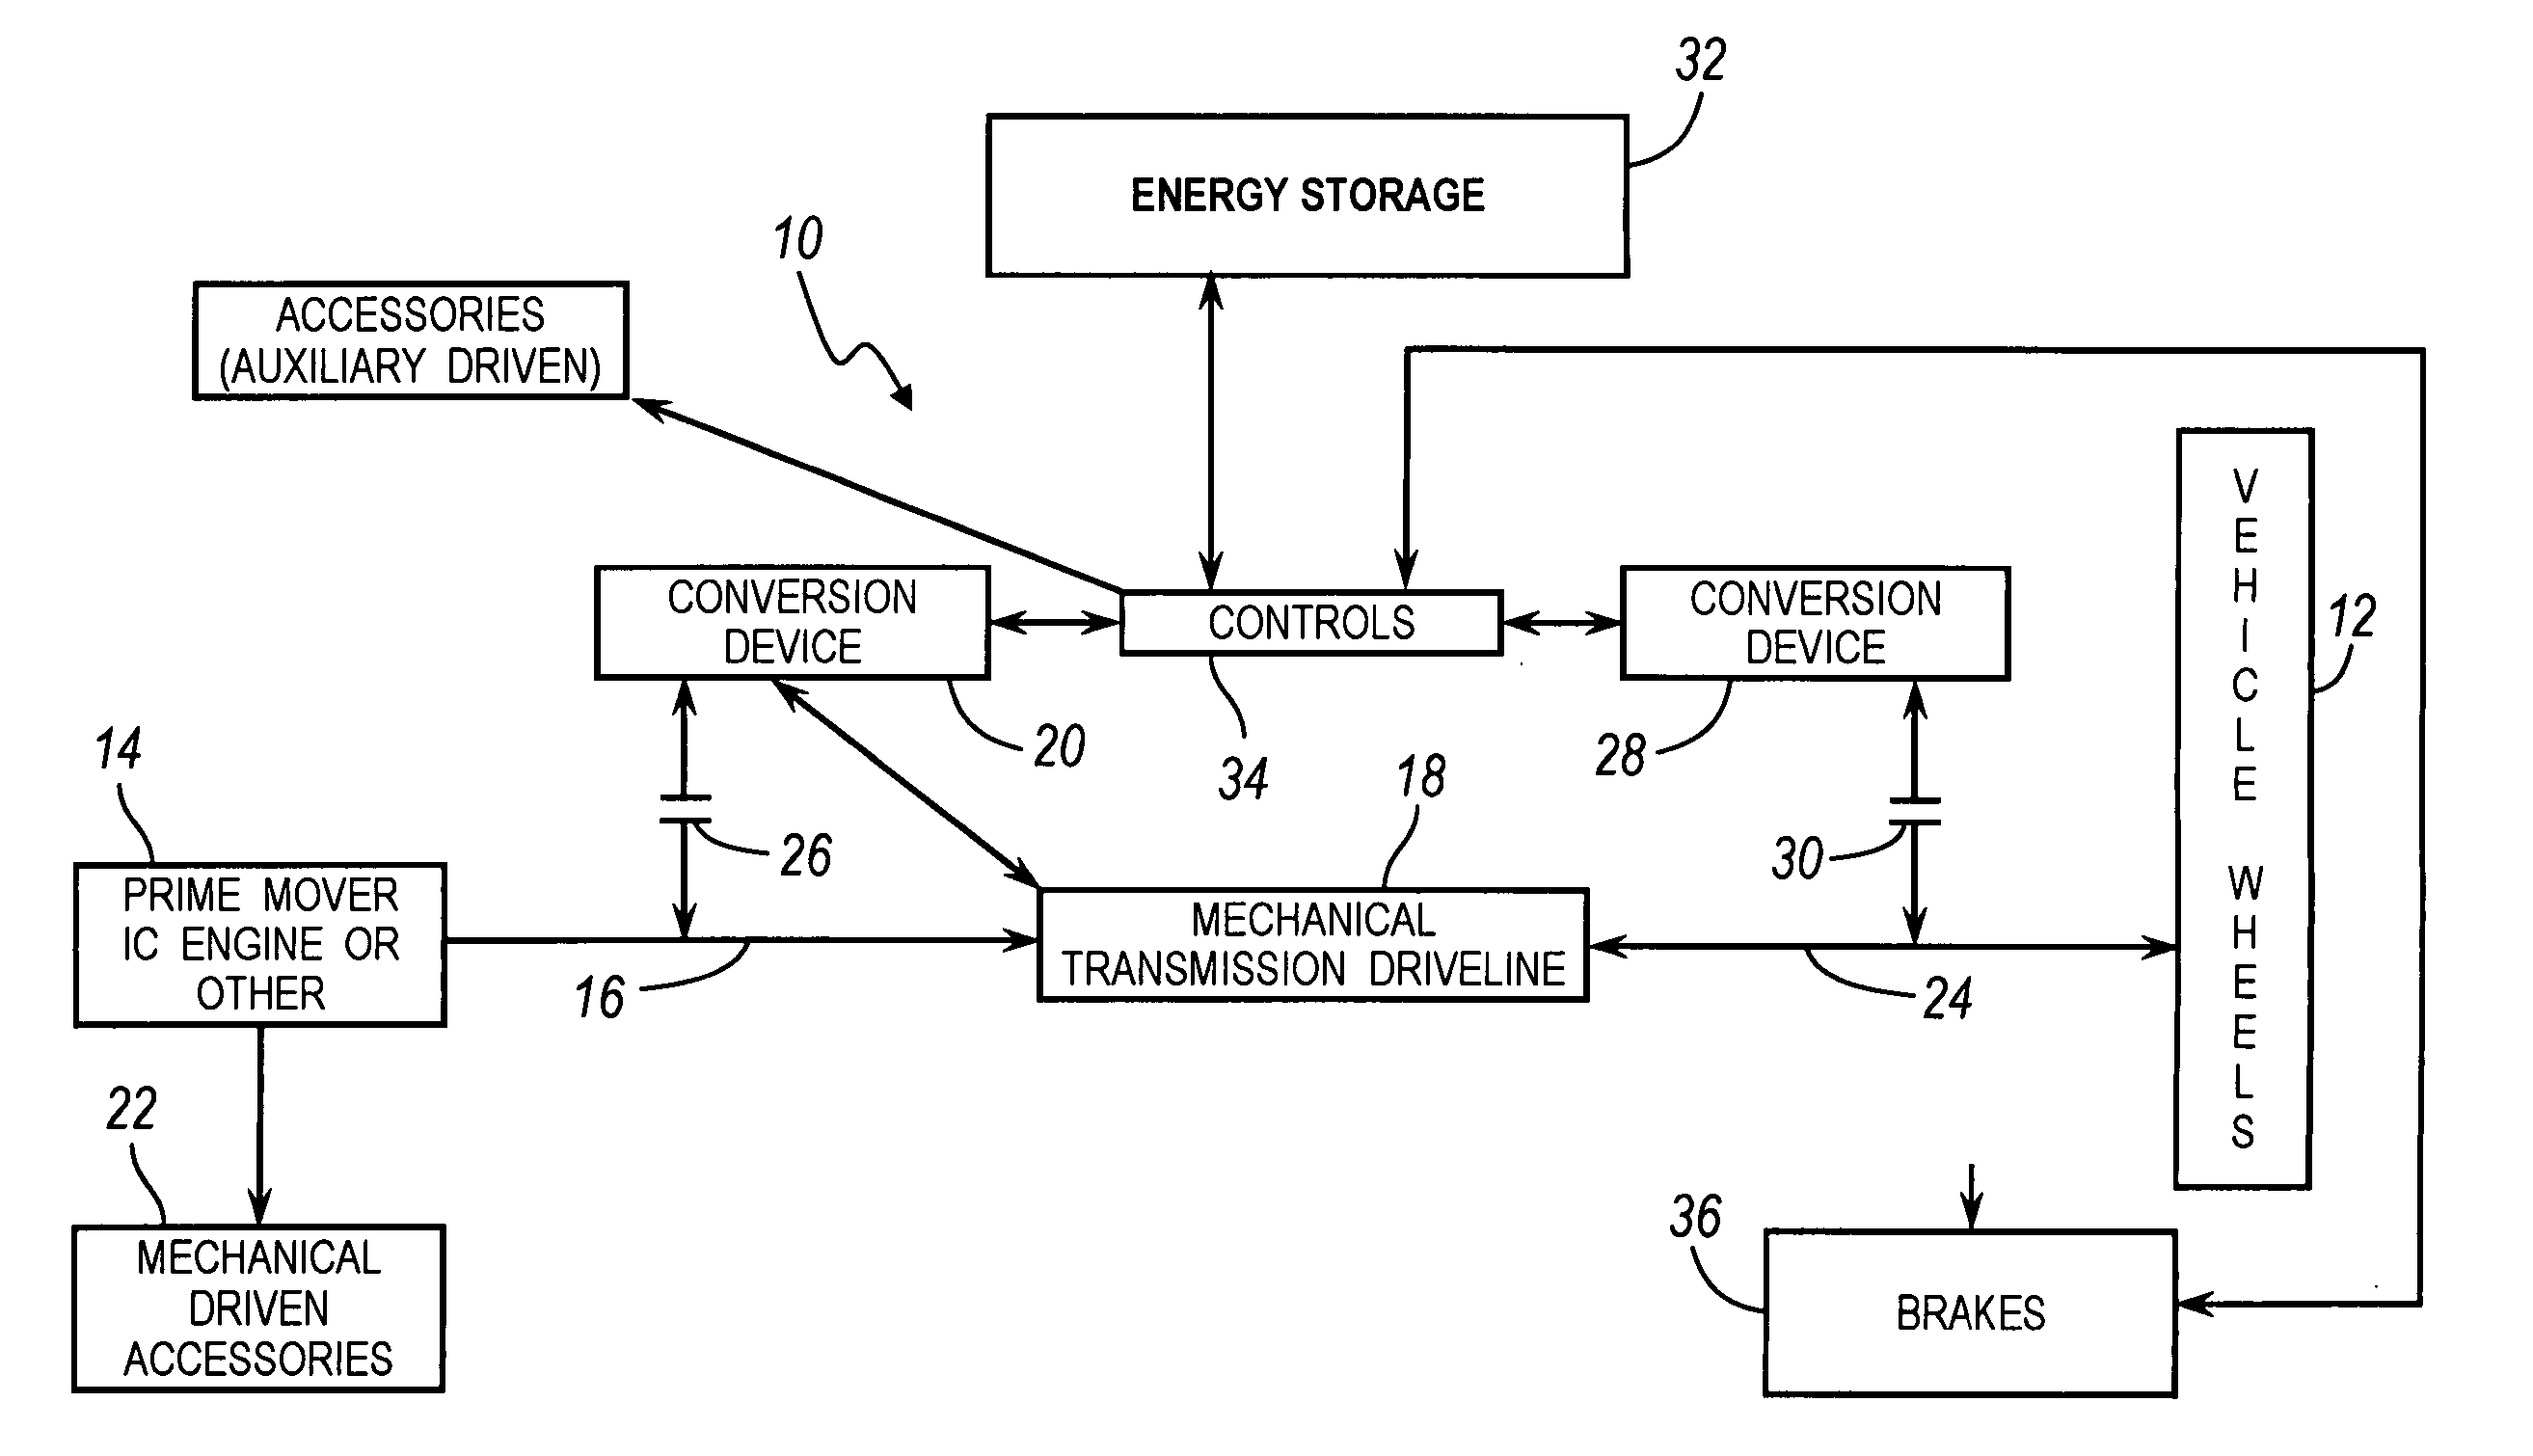 Vehicle powertrain that compensates for a prime mover having slow transient response